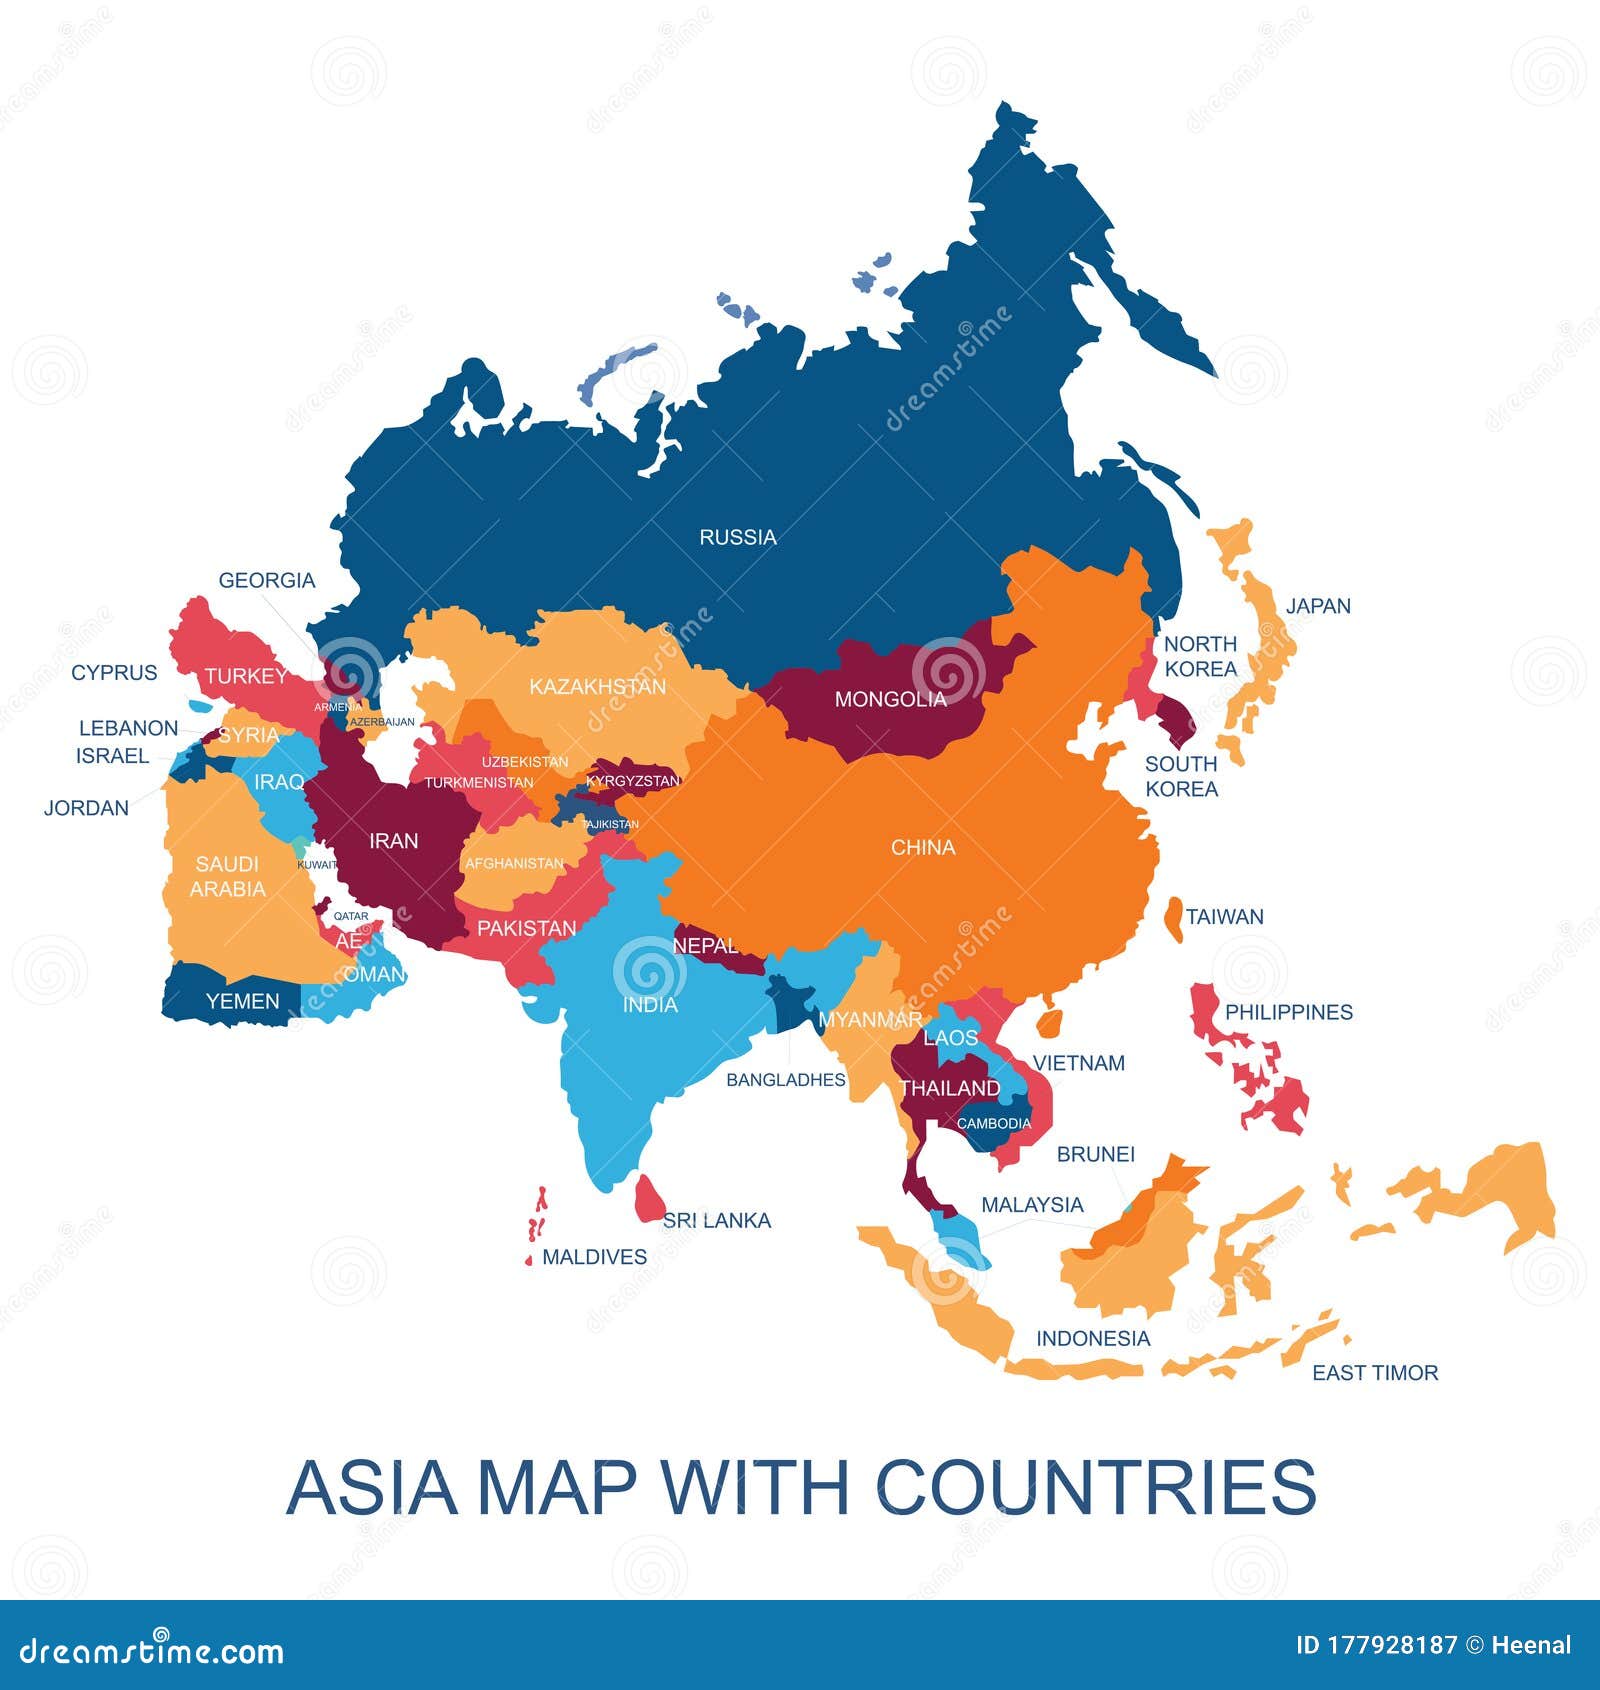 asian countries list map